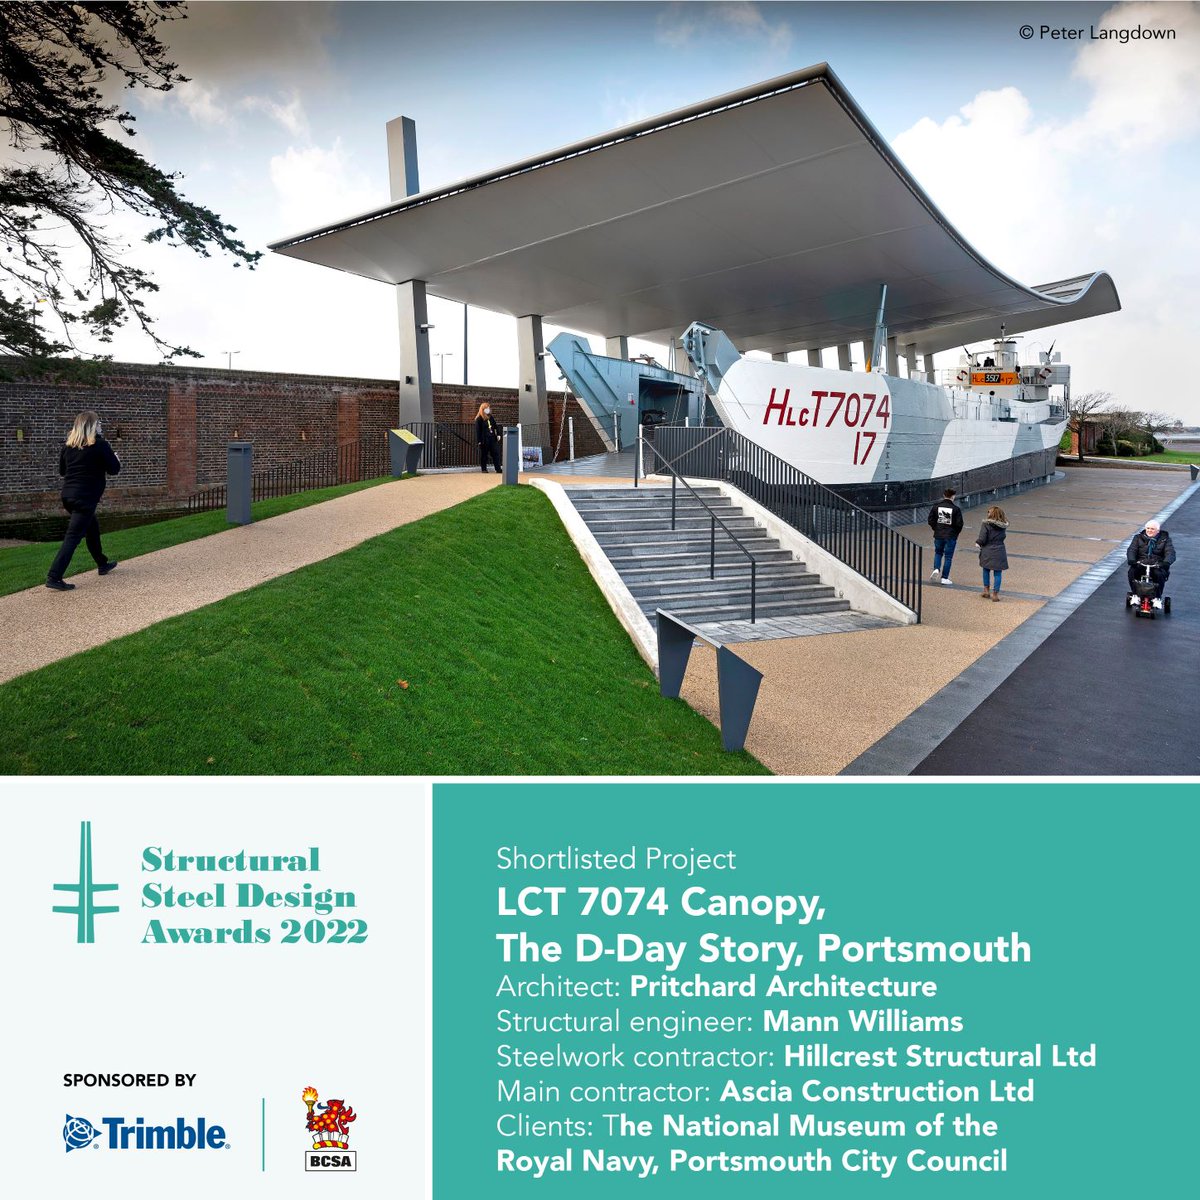 SSDA
LCT 7074 Canopy, The D-Day Story, Portsmouth
Architect @Pritchard_Arch Structural engineer @MannWilliamsUK S/work contractor @HillcrestSteel
Main contractor @Asciaconstruct Clients @NatMuseumRN @portsmouthtoday
Winner/s announced 29/09/22
Thanks to sponsor @Trimble_TeklaUK